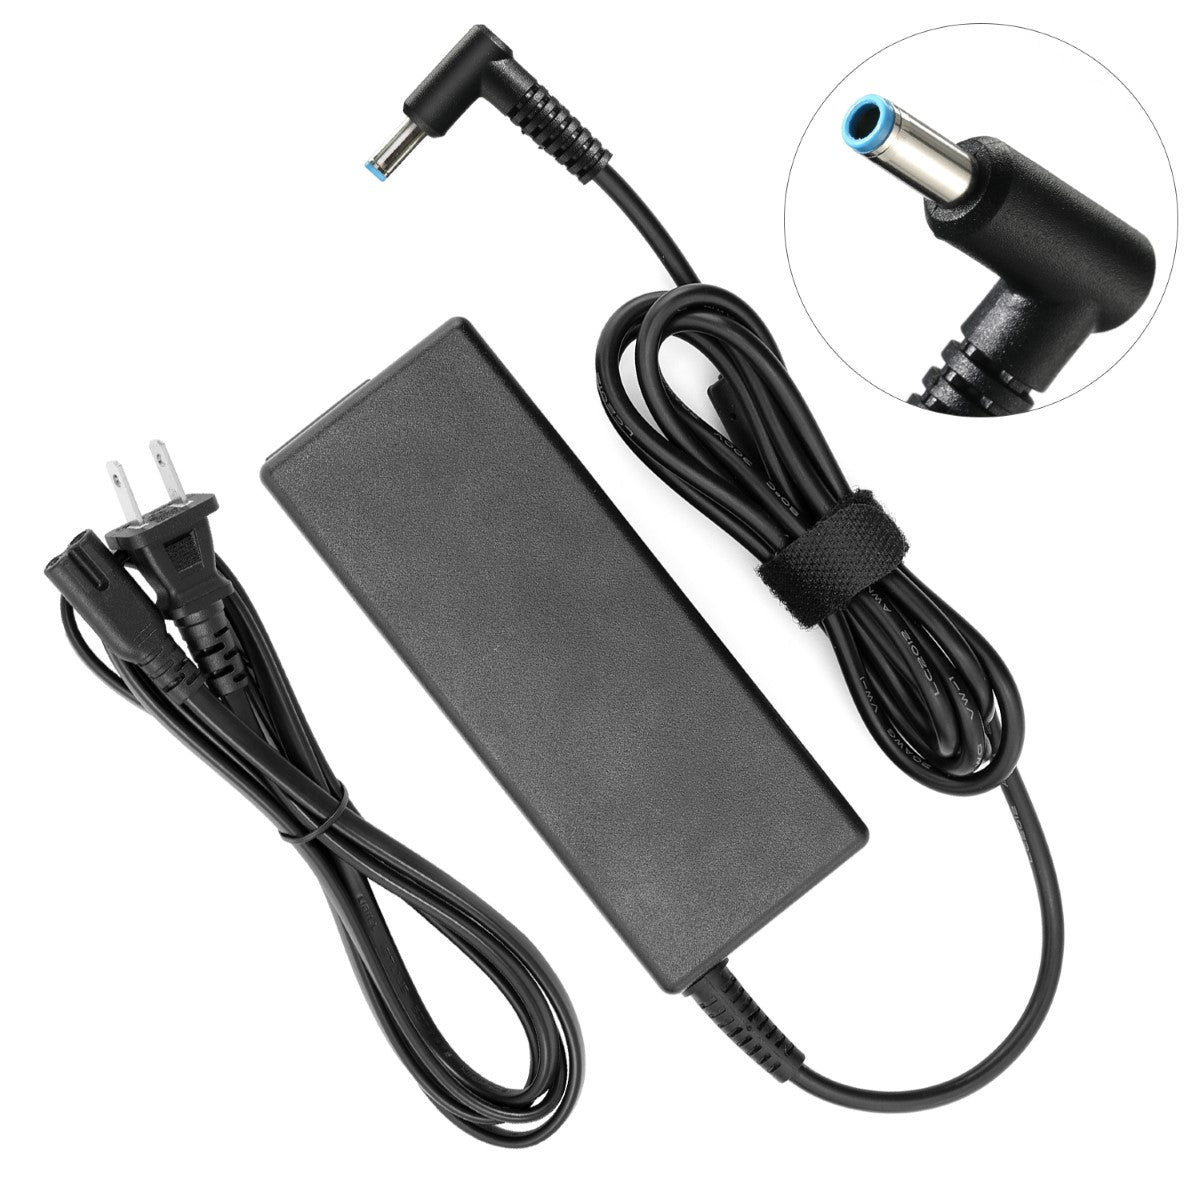 Charger for HP Pavilion Touchsmart 14-f020us Sleekbook Laptop